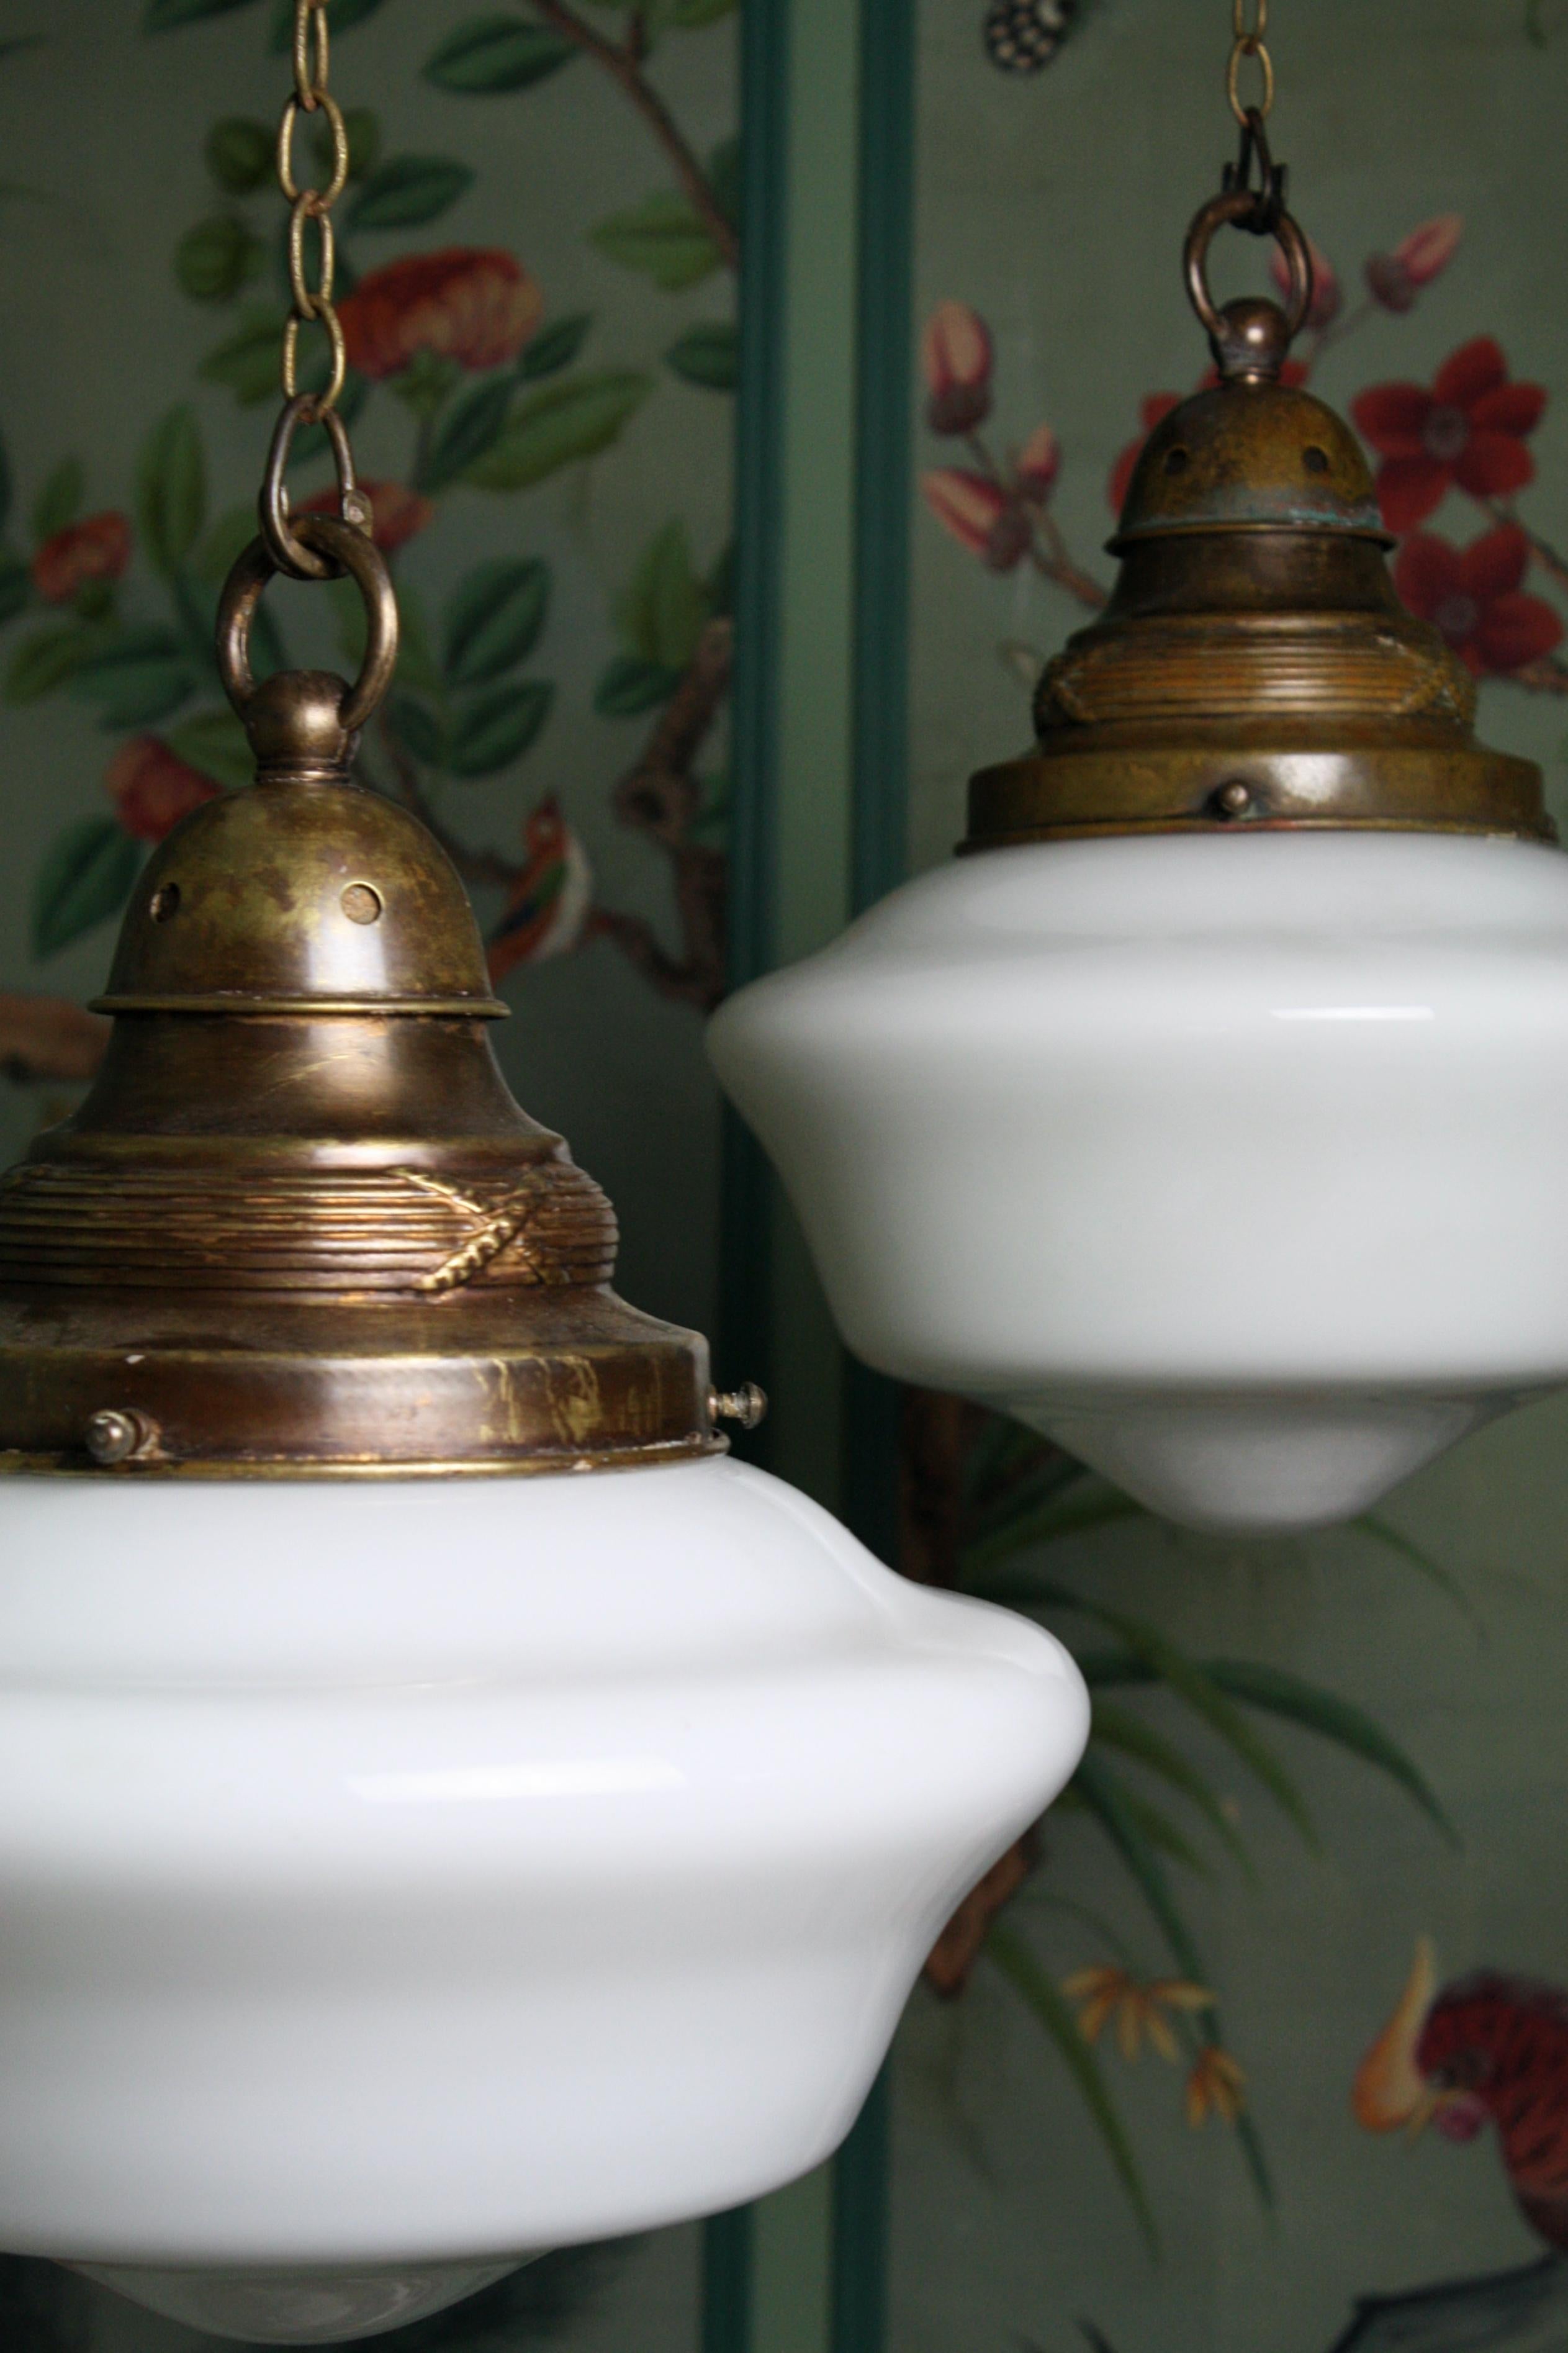 Pair of hand blown opaline glass pendants, with original heavy gauge brass galleries.

Each light has its original brass chain and ceiling rose, and comes with a length of three core silk flex and a new bayonet bulb holder.

Age related patina